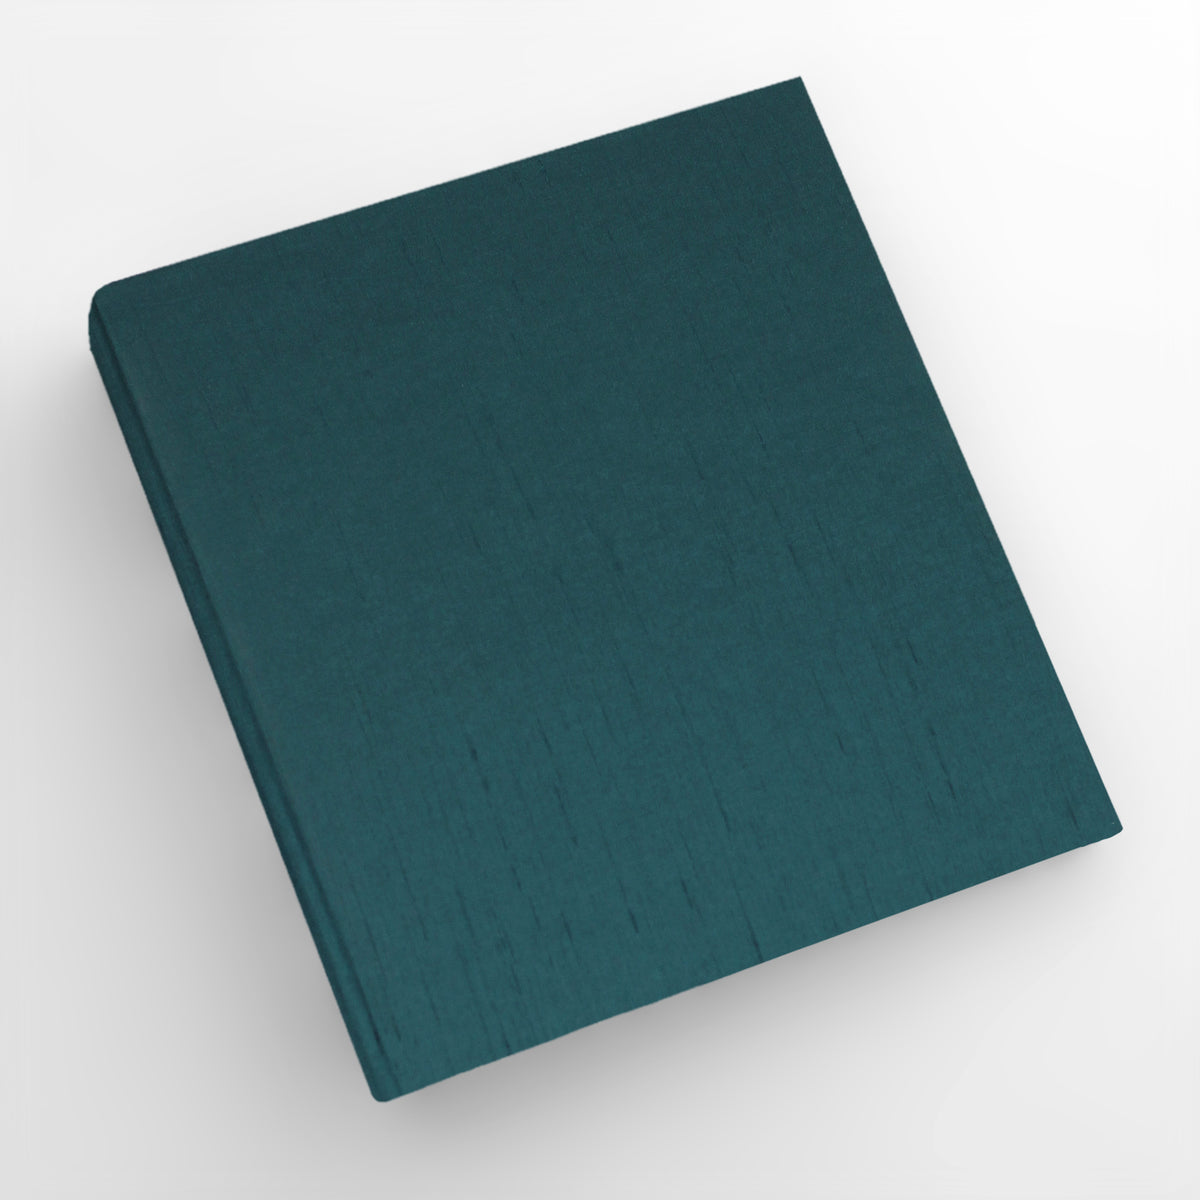 Large Photo Binder For 8x10 Photos | Cover: Teal Blue Silk | Available Personalized